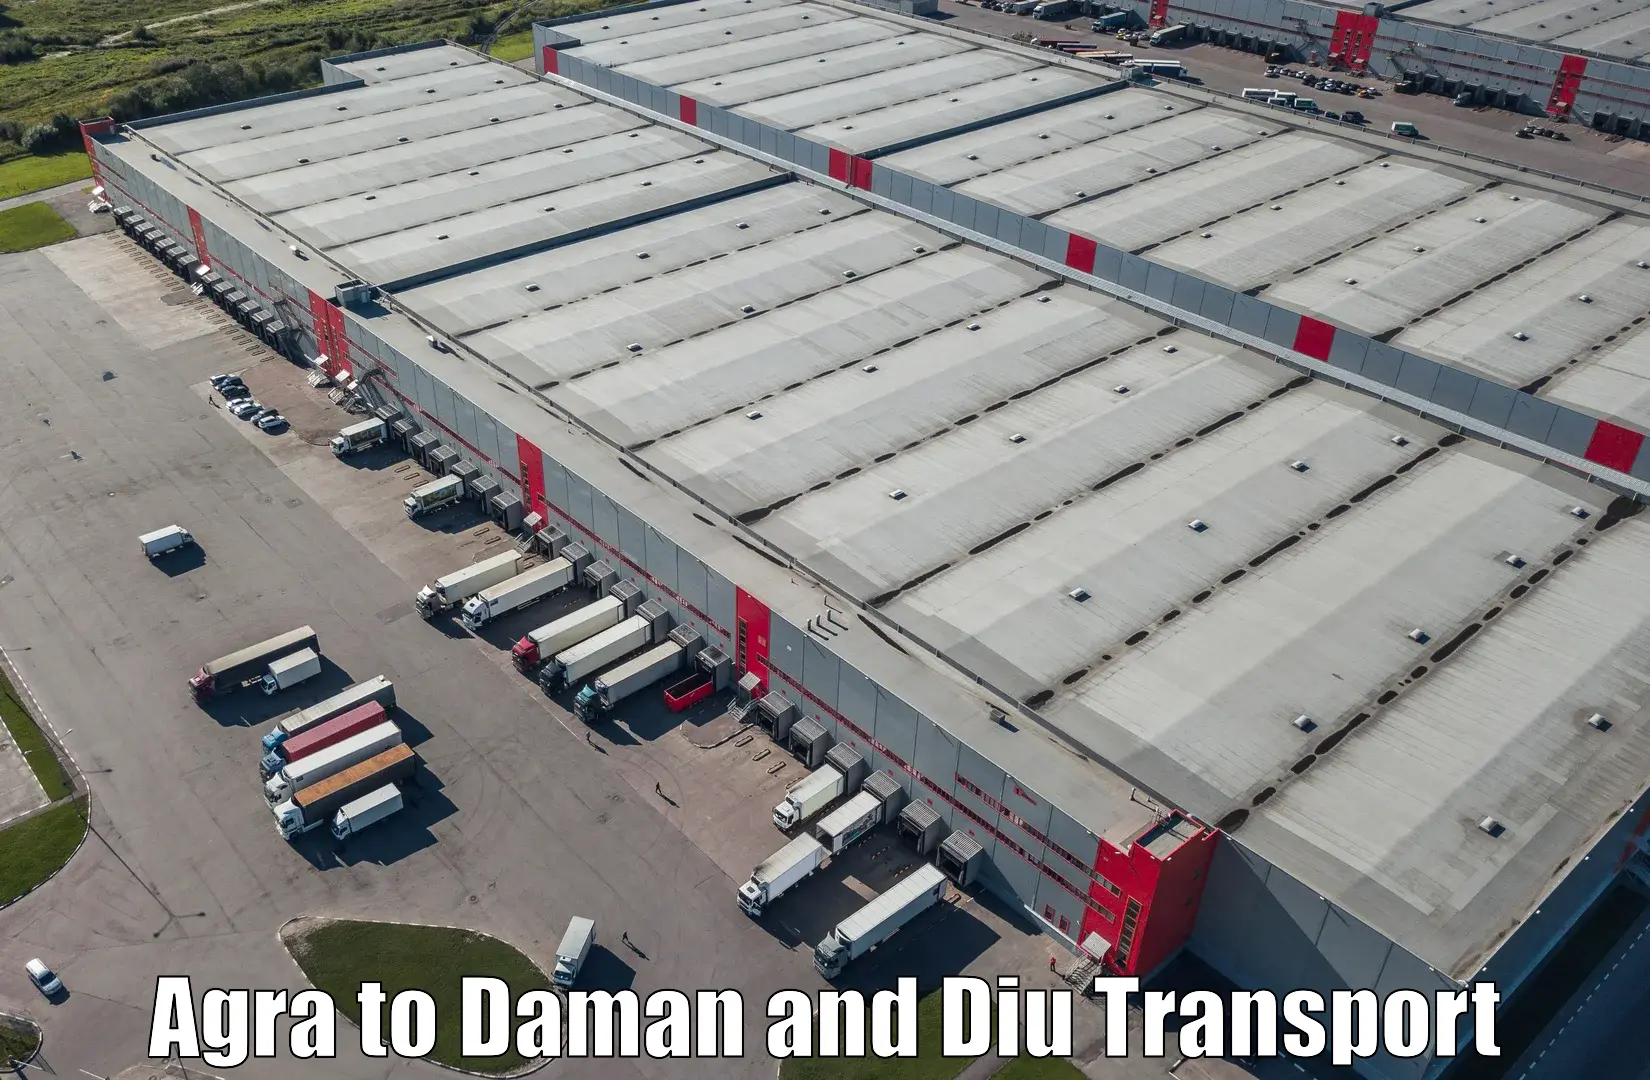 Pick up transport service Agra to Daman and Diu